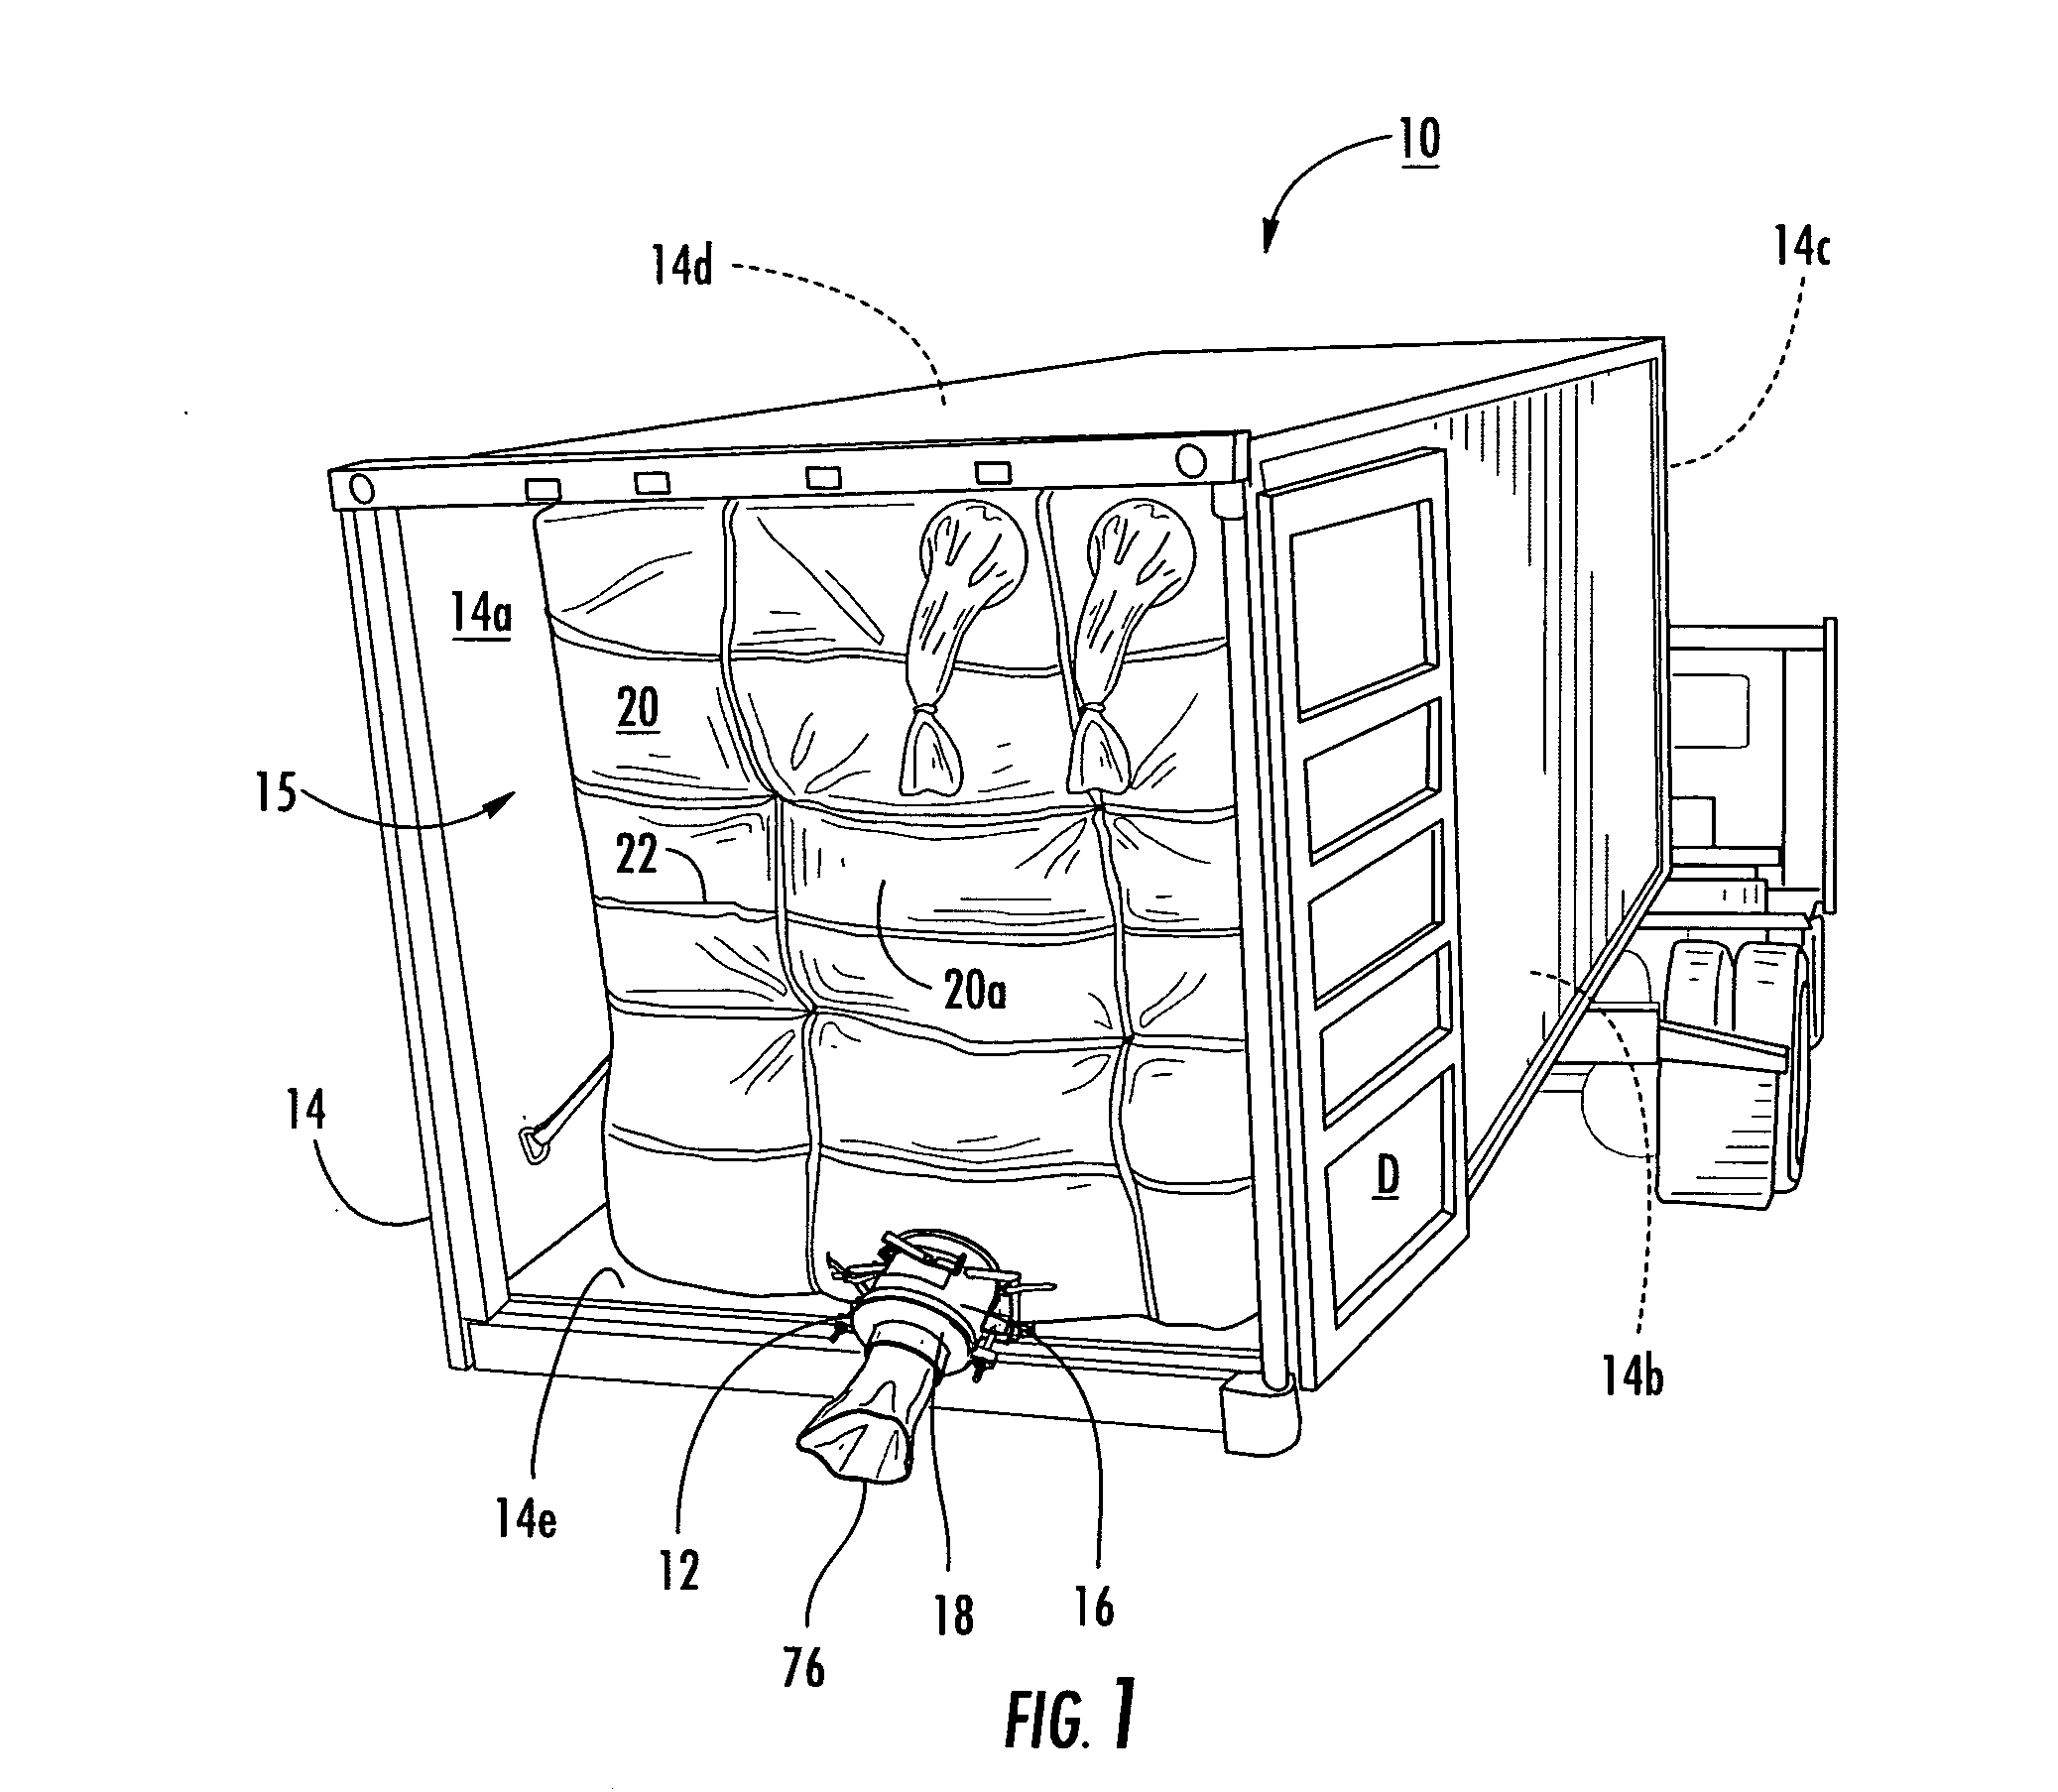 Discharge apparatus for a shipping container